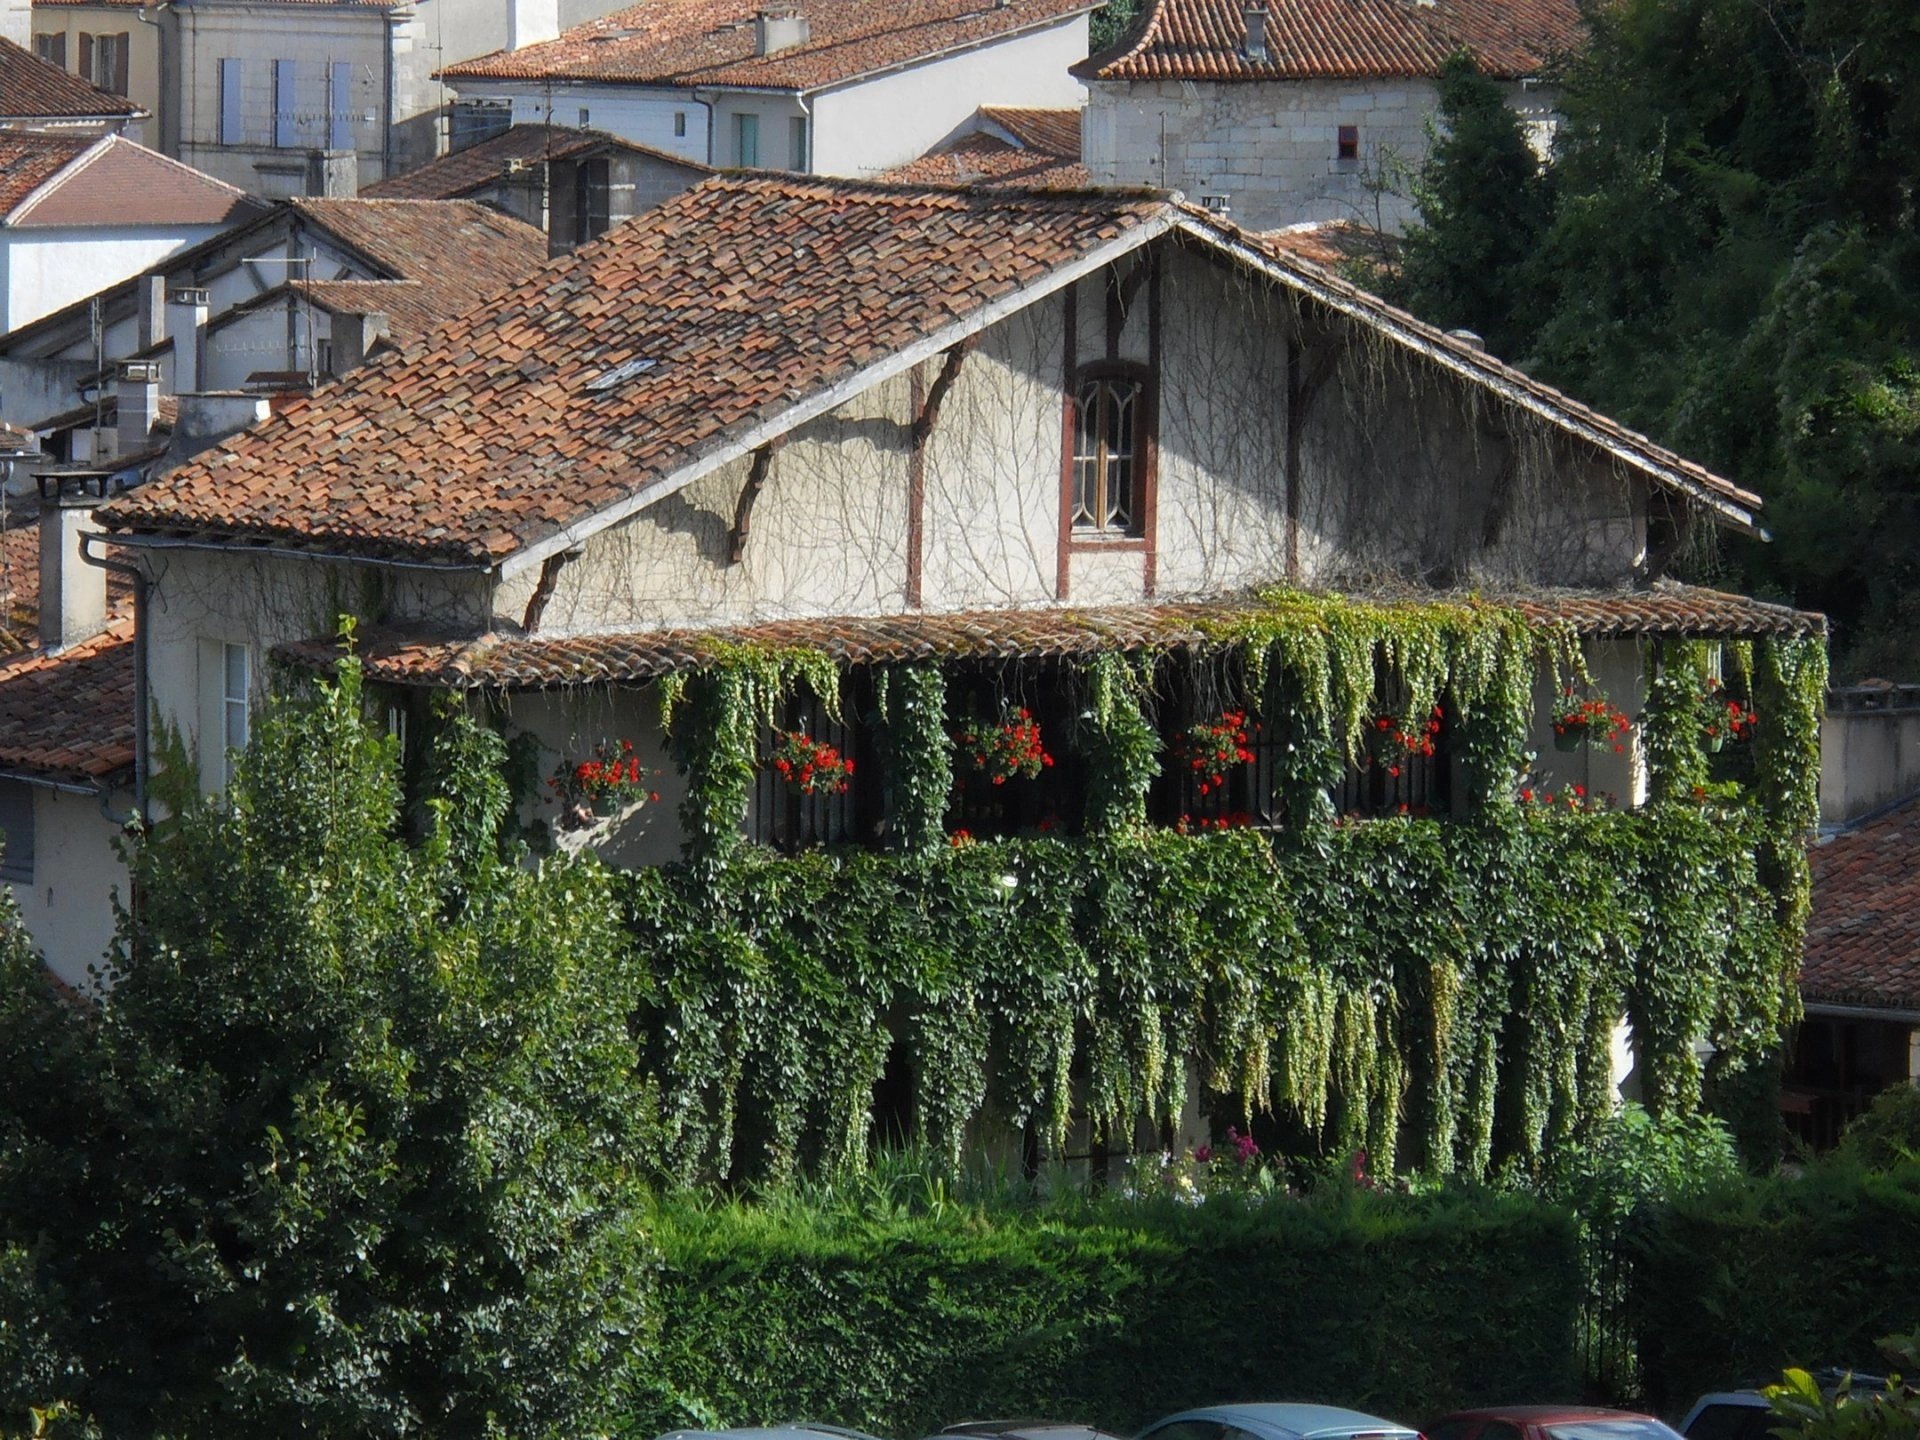 Renovated former Auberge with lovely floral balconies